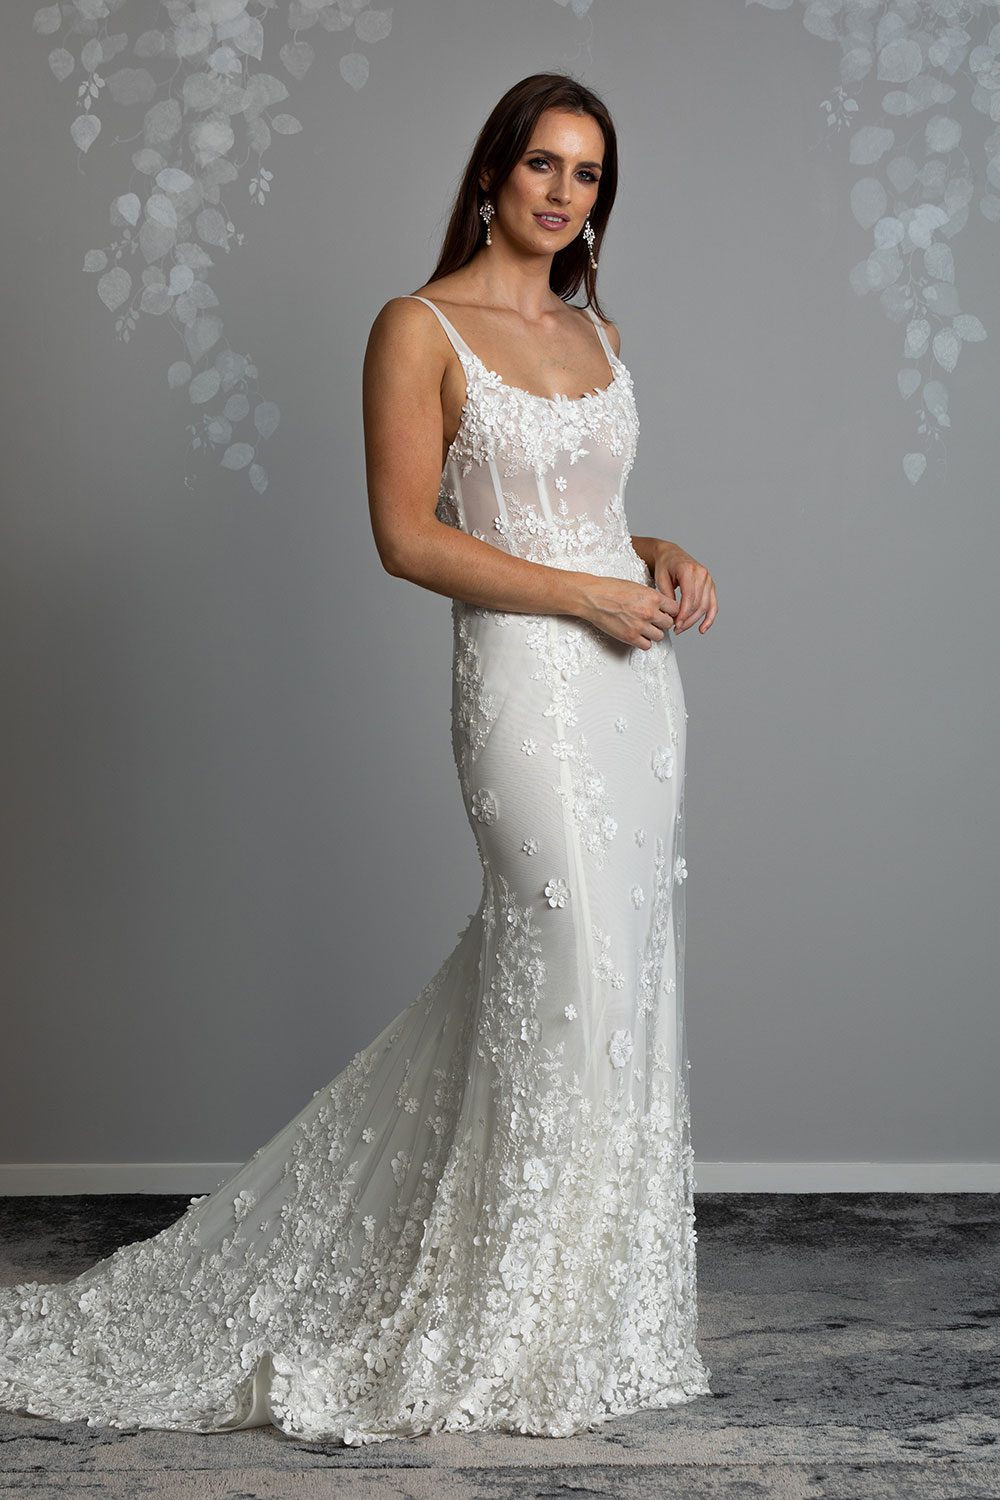 E'more Wedding gown from Vinka Design - This stunning lace wedding gown is hand sewn with a fully beaded 3D flower embroidery. Structured and boned bodice with scoop neckline in the front and low back. Stretch fit skirt flares into full lace train. Full length view of dress showing long train and figure hugging skirt with flattering scoop neck bodice